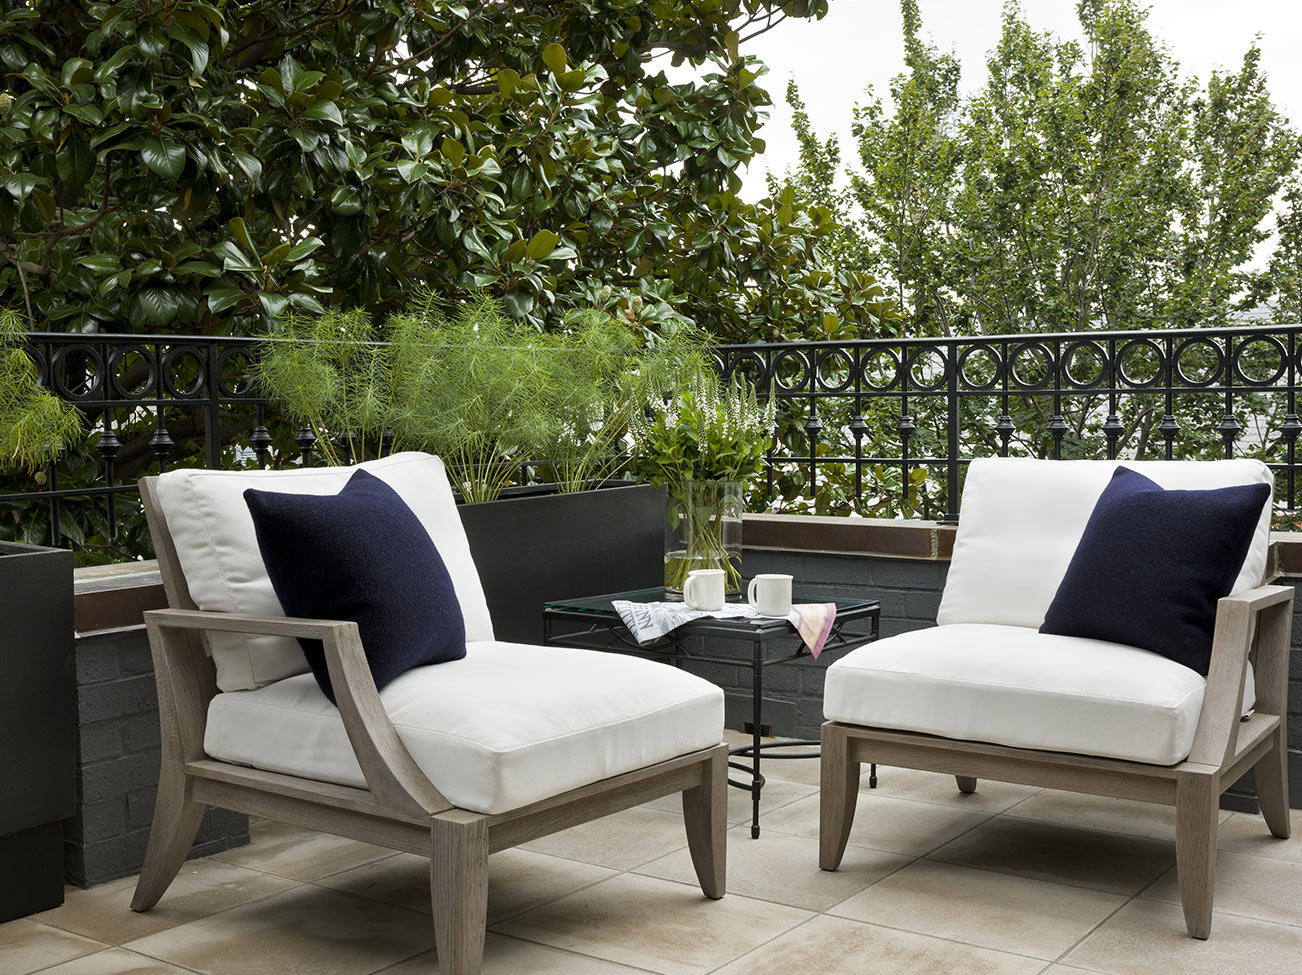 Stone patio with decorative wrought iron railing, white cushioned chairs, and navy accent pillows set against lush greenery.